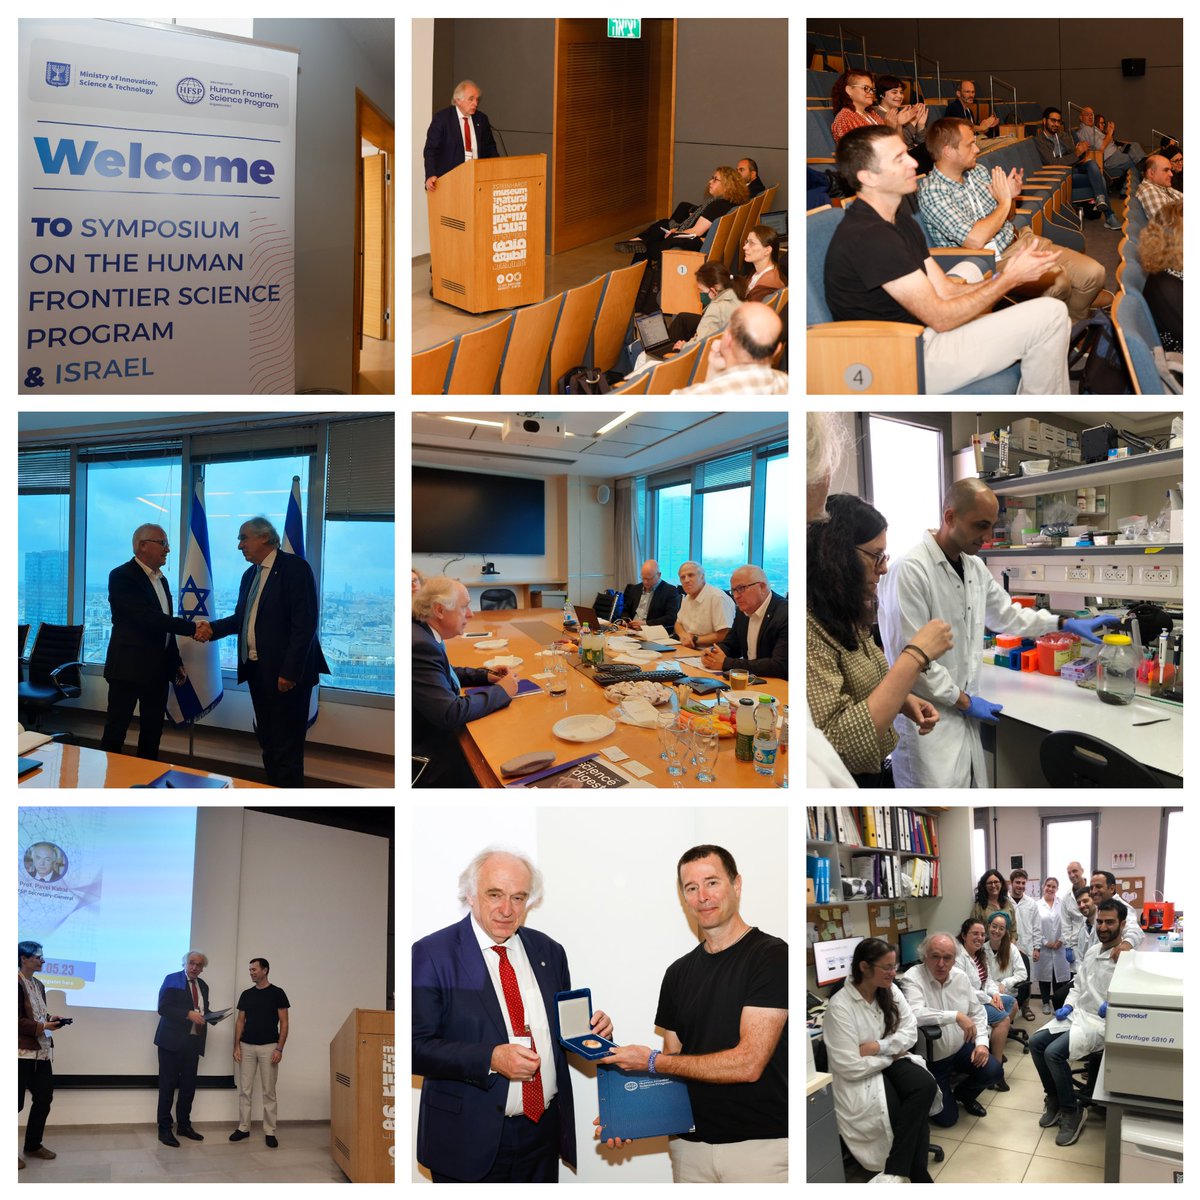 It was a pleasure to connect with the Israeli scientific community in their labs, universities, and ministry offices and to meet Israeli #HFSPAwardees and #HFSPAlumni! Thanks Israel for reinforcing our collaboration toward key initiatives for excellence in #basicfrontierscience!